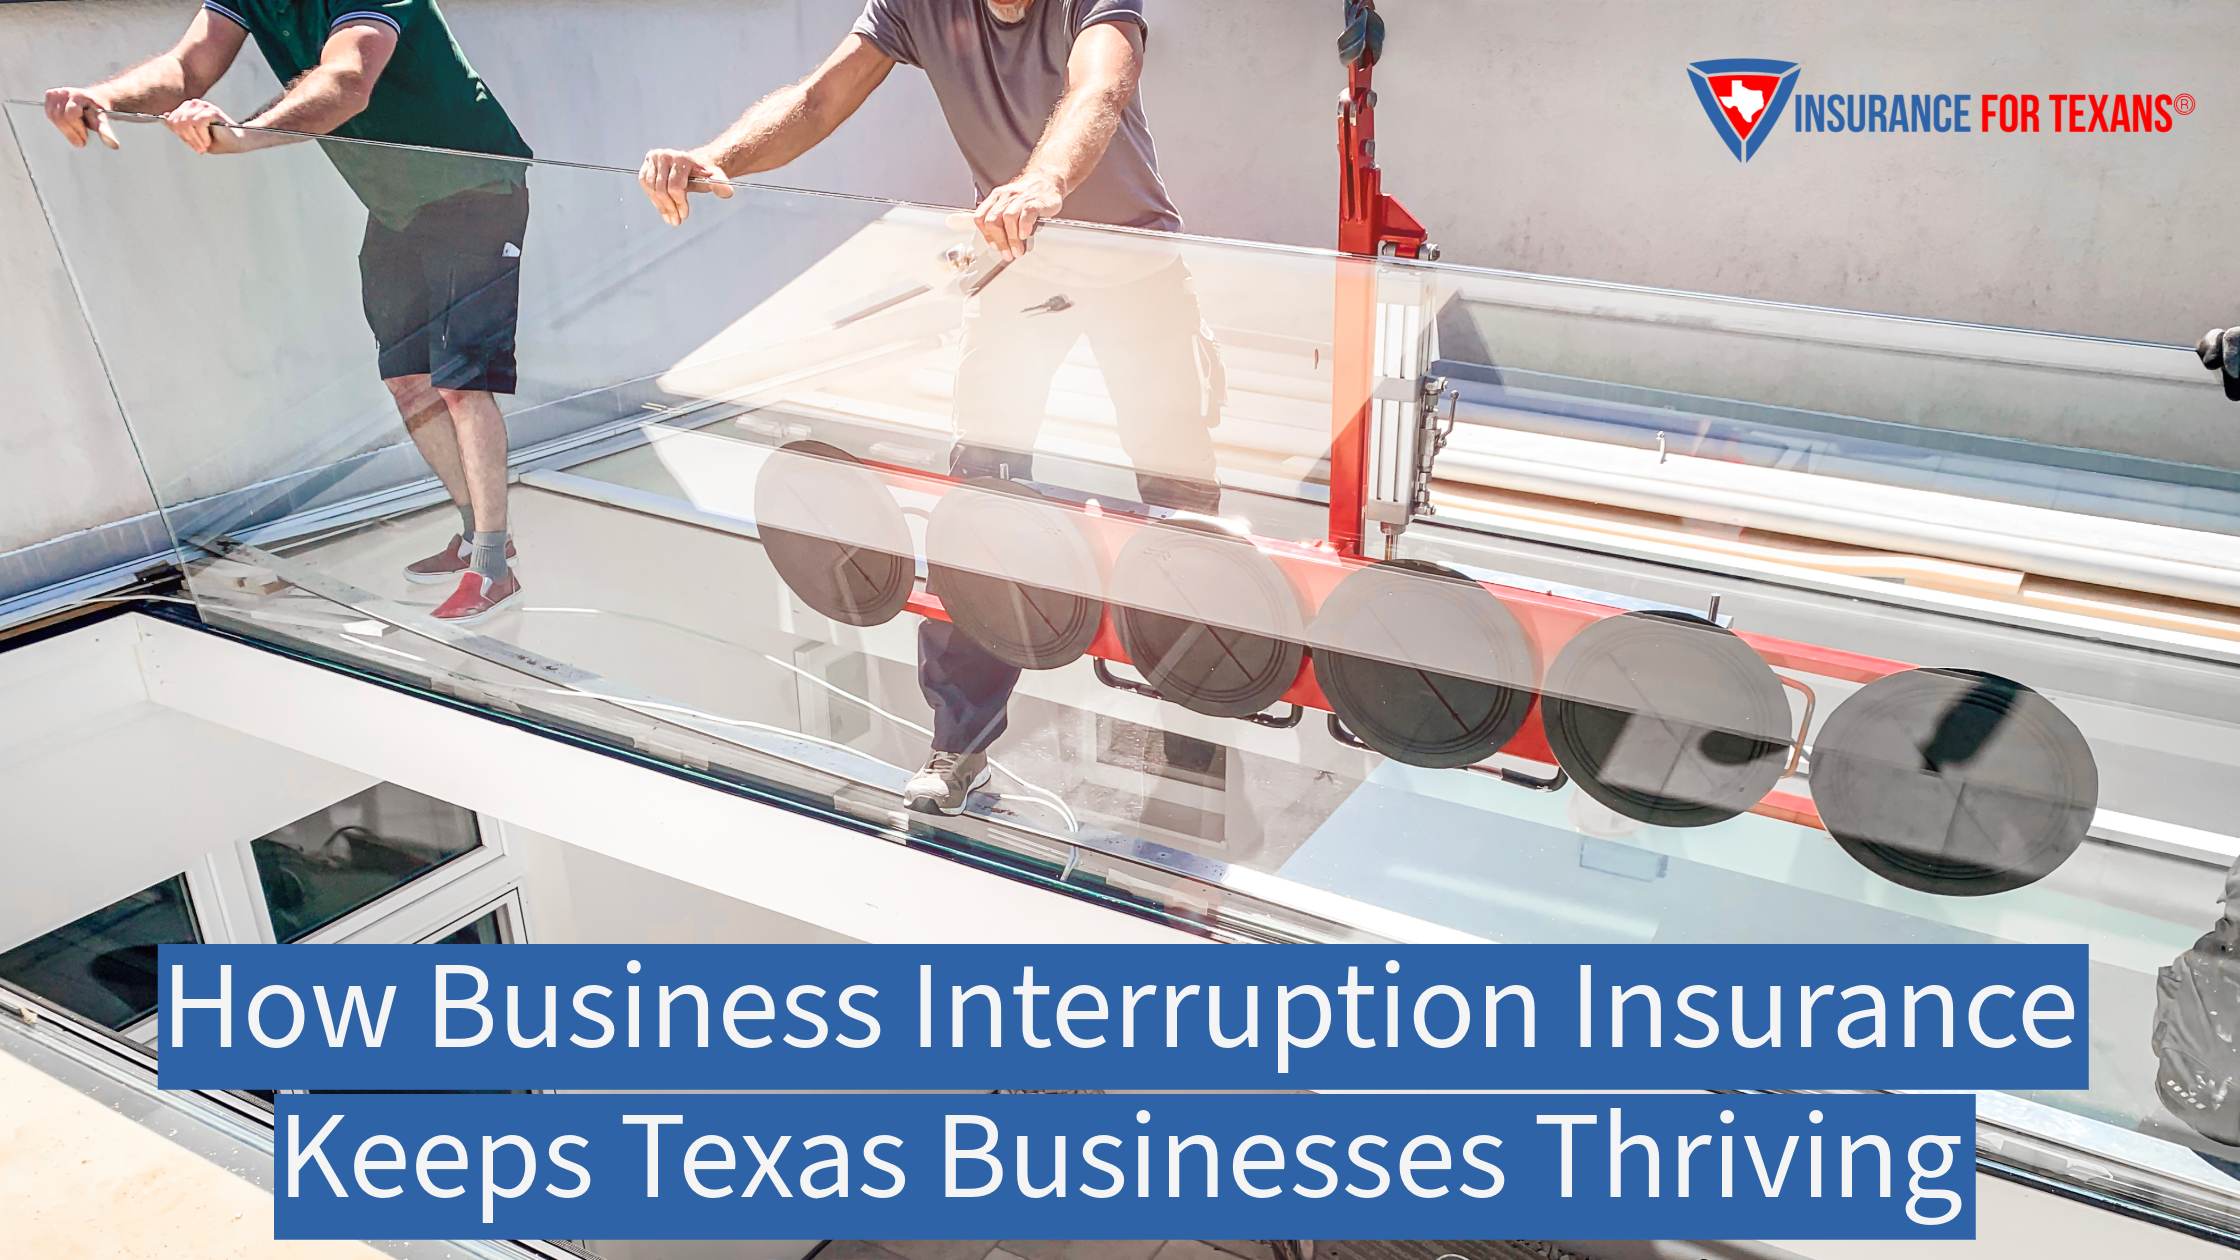 How Business Interruption Insurance Keeps Texas Businesses Thriving